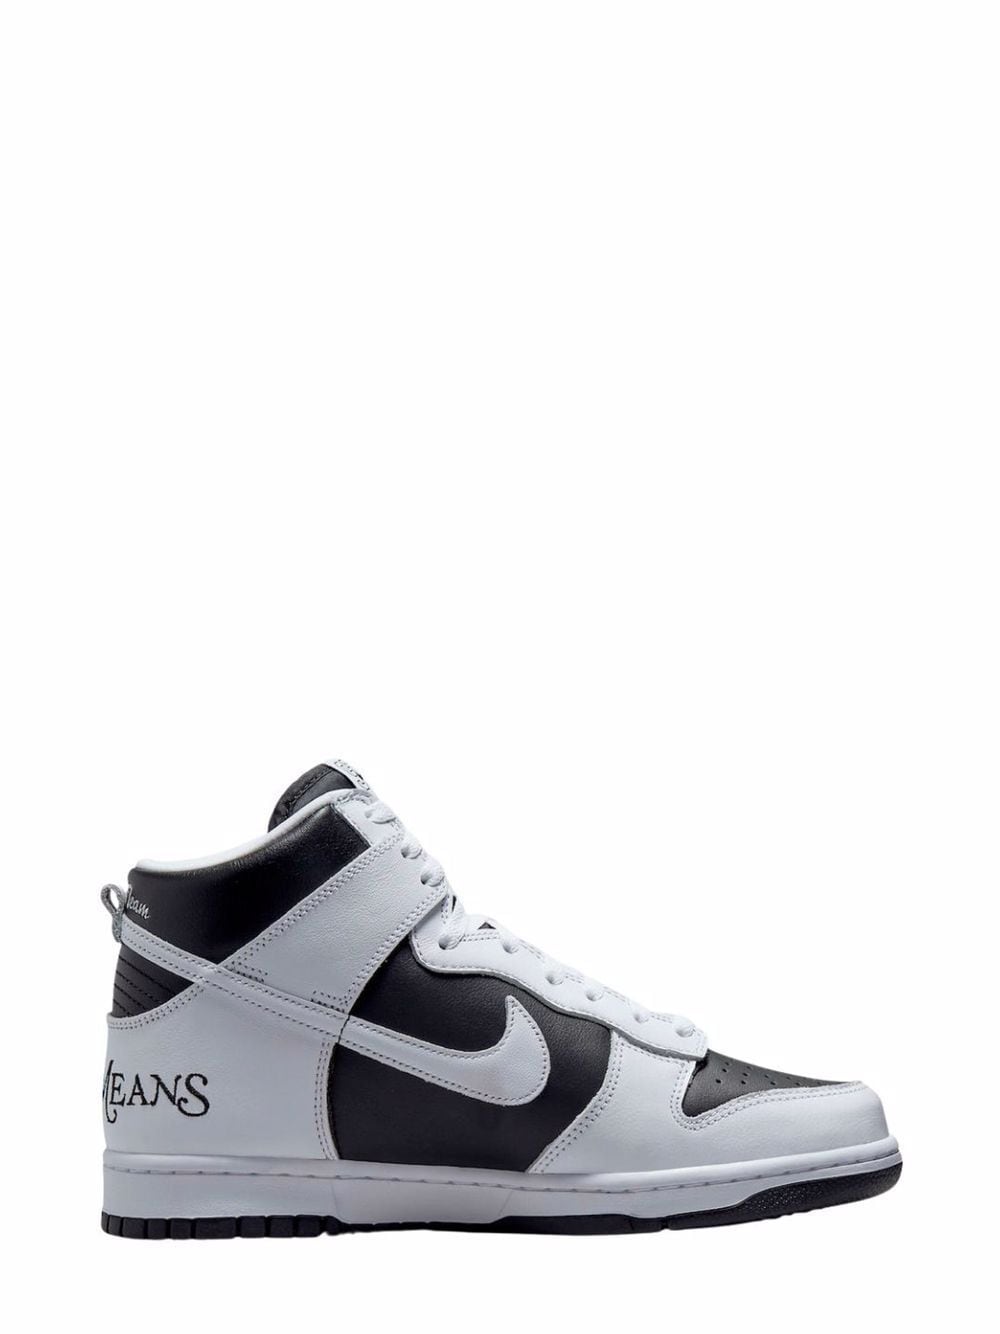 Nike x Supreme SB Dunk High "By Any Means - White/Black" sneakers von Nike